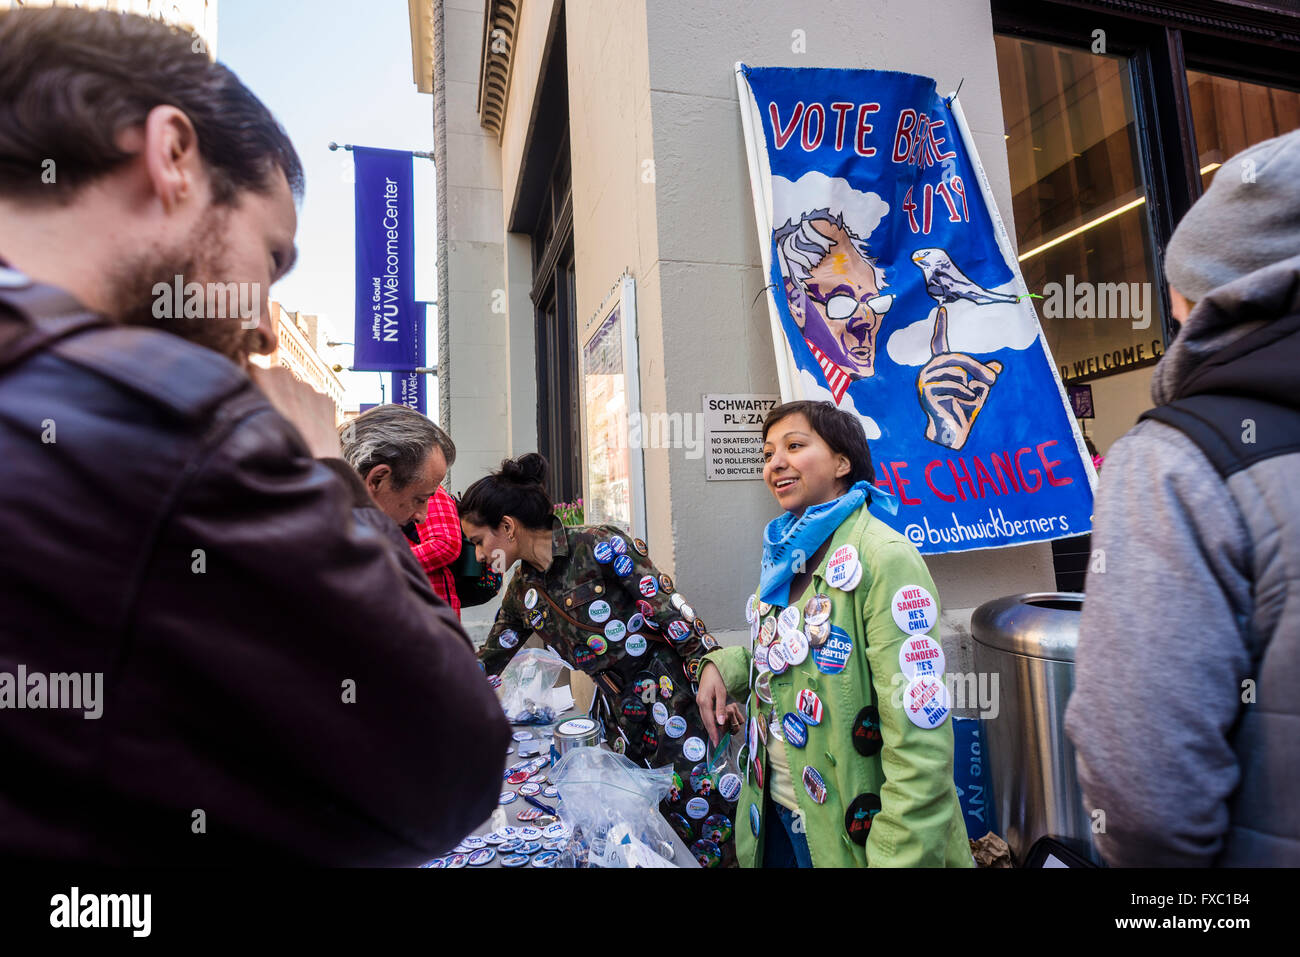 New York, USA. 13th April, 2016. Hours before a Bernie Sanders rally is scheduled to begin, supports sell buttons and other campaign buttons in Schwartz Plaza near Washington Square Park. Over 10,000 people are expected to attend the rally for the Democratic Presidential Candidate. Credit: Stacy Walsh Rosenstock/Alamy Live News Stock Photo